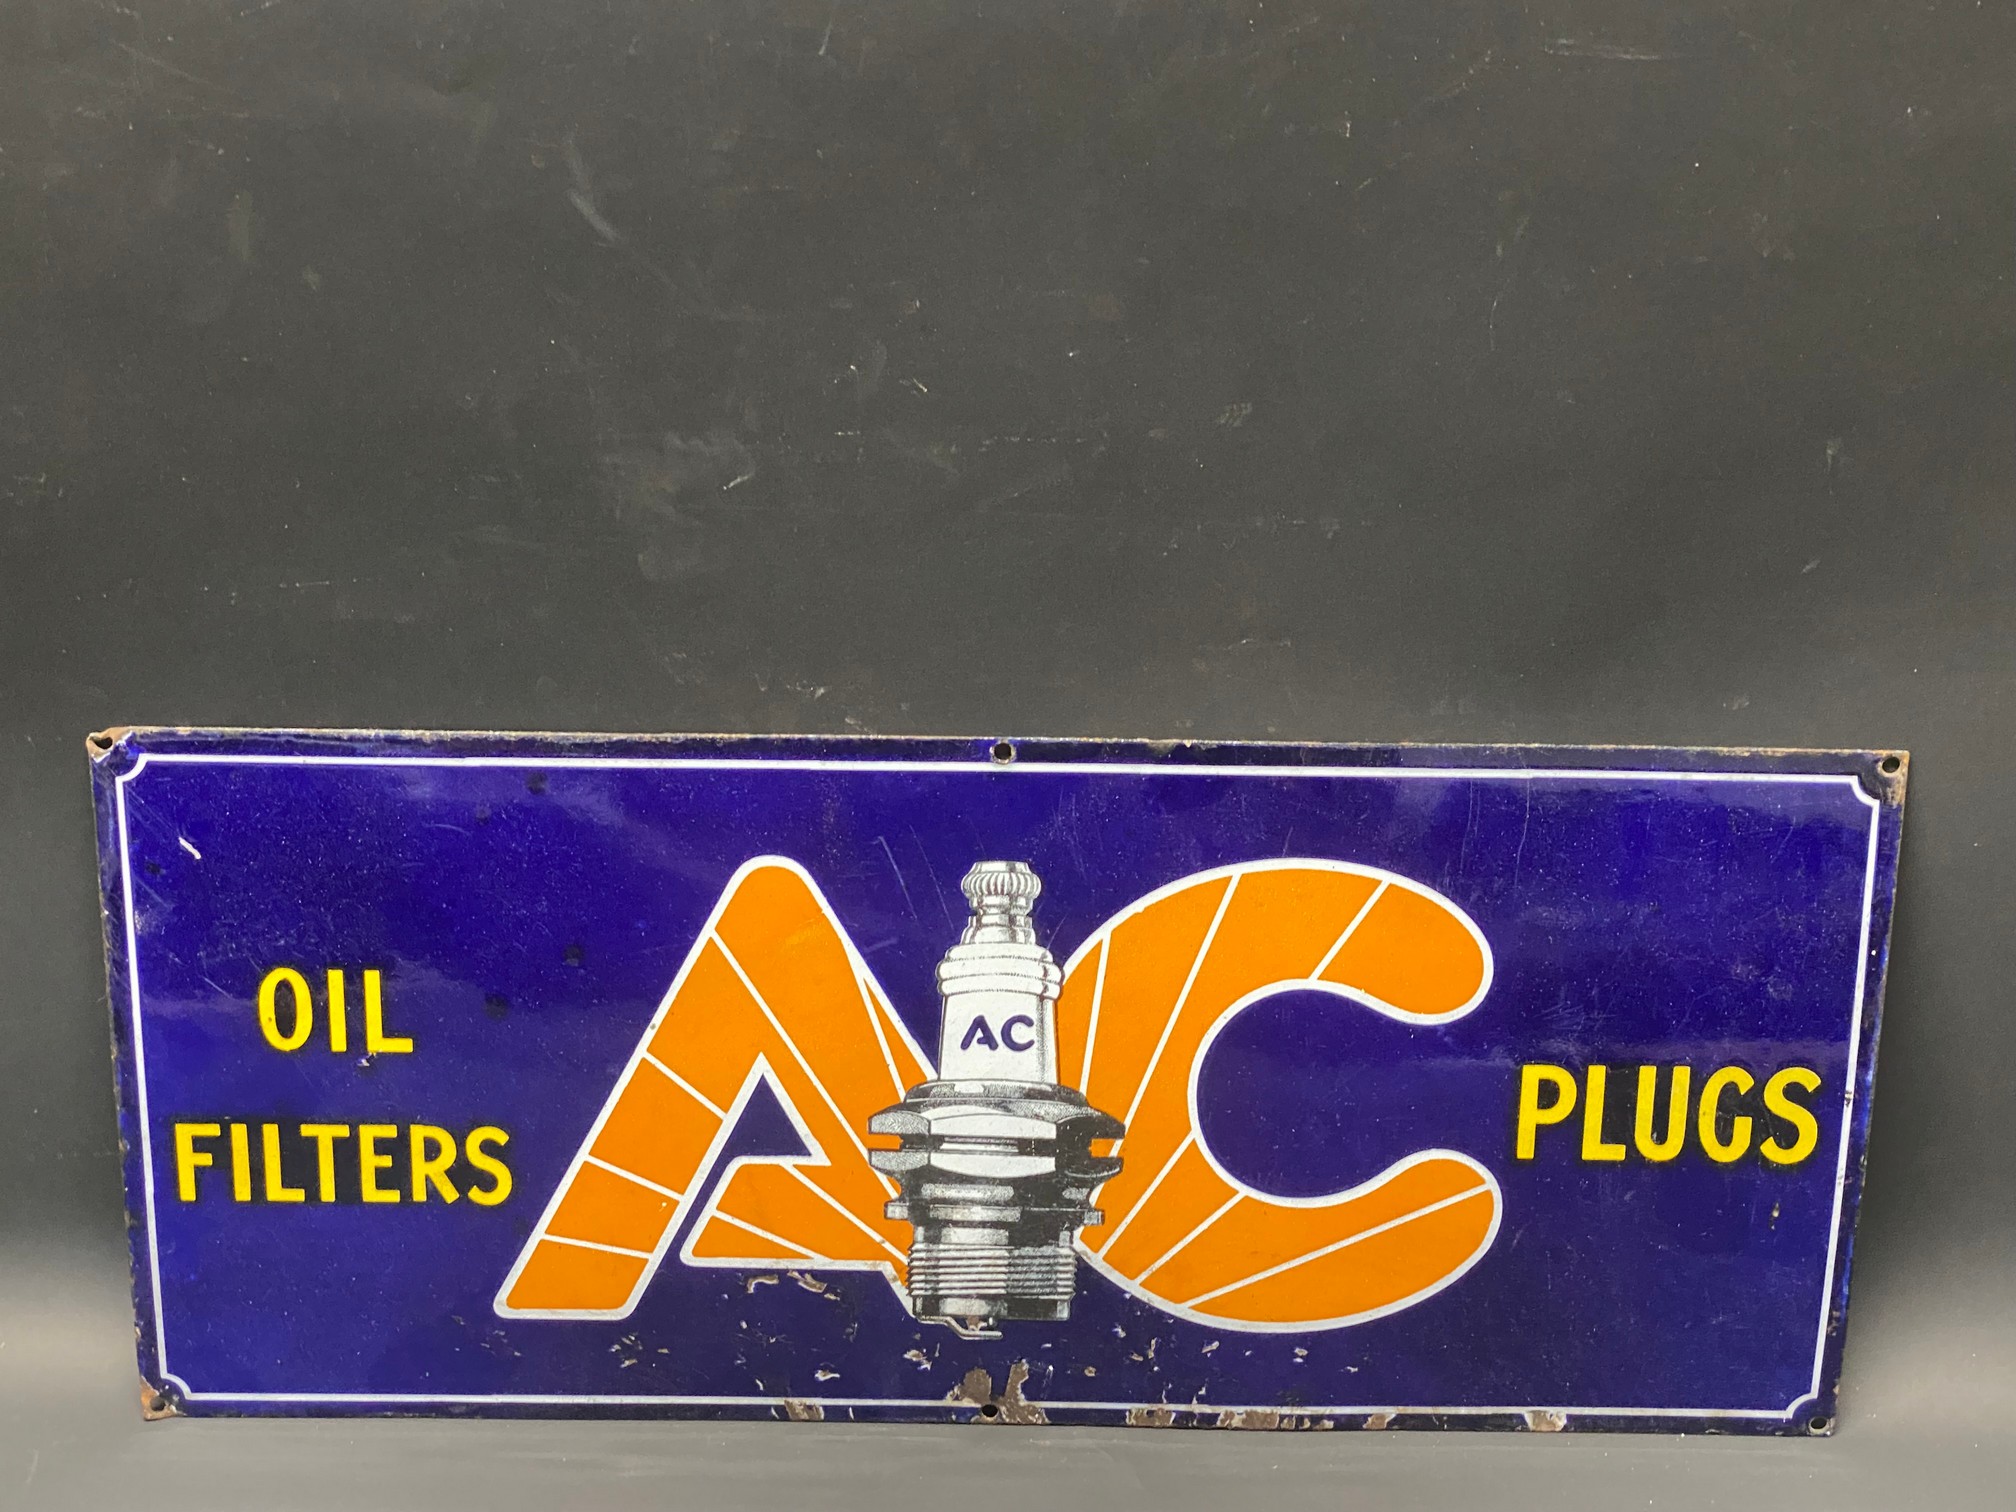 An AC Oil Filters and Plugs rectangular enamel sign, 21 x 9". - Image 3 of 4